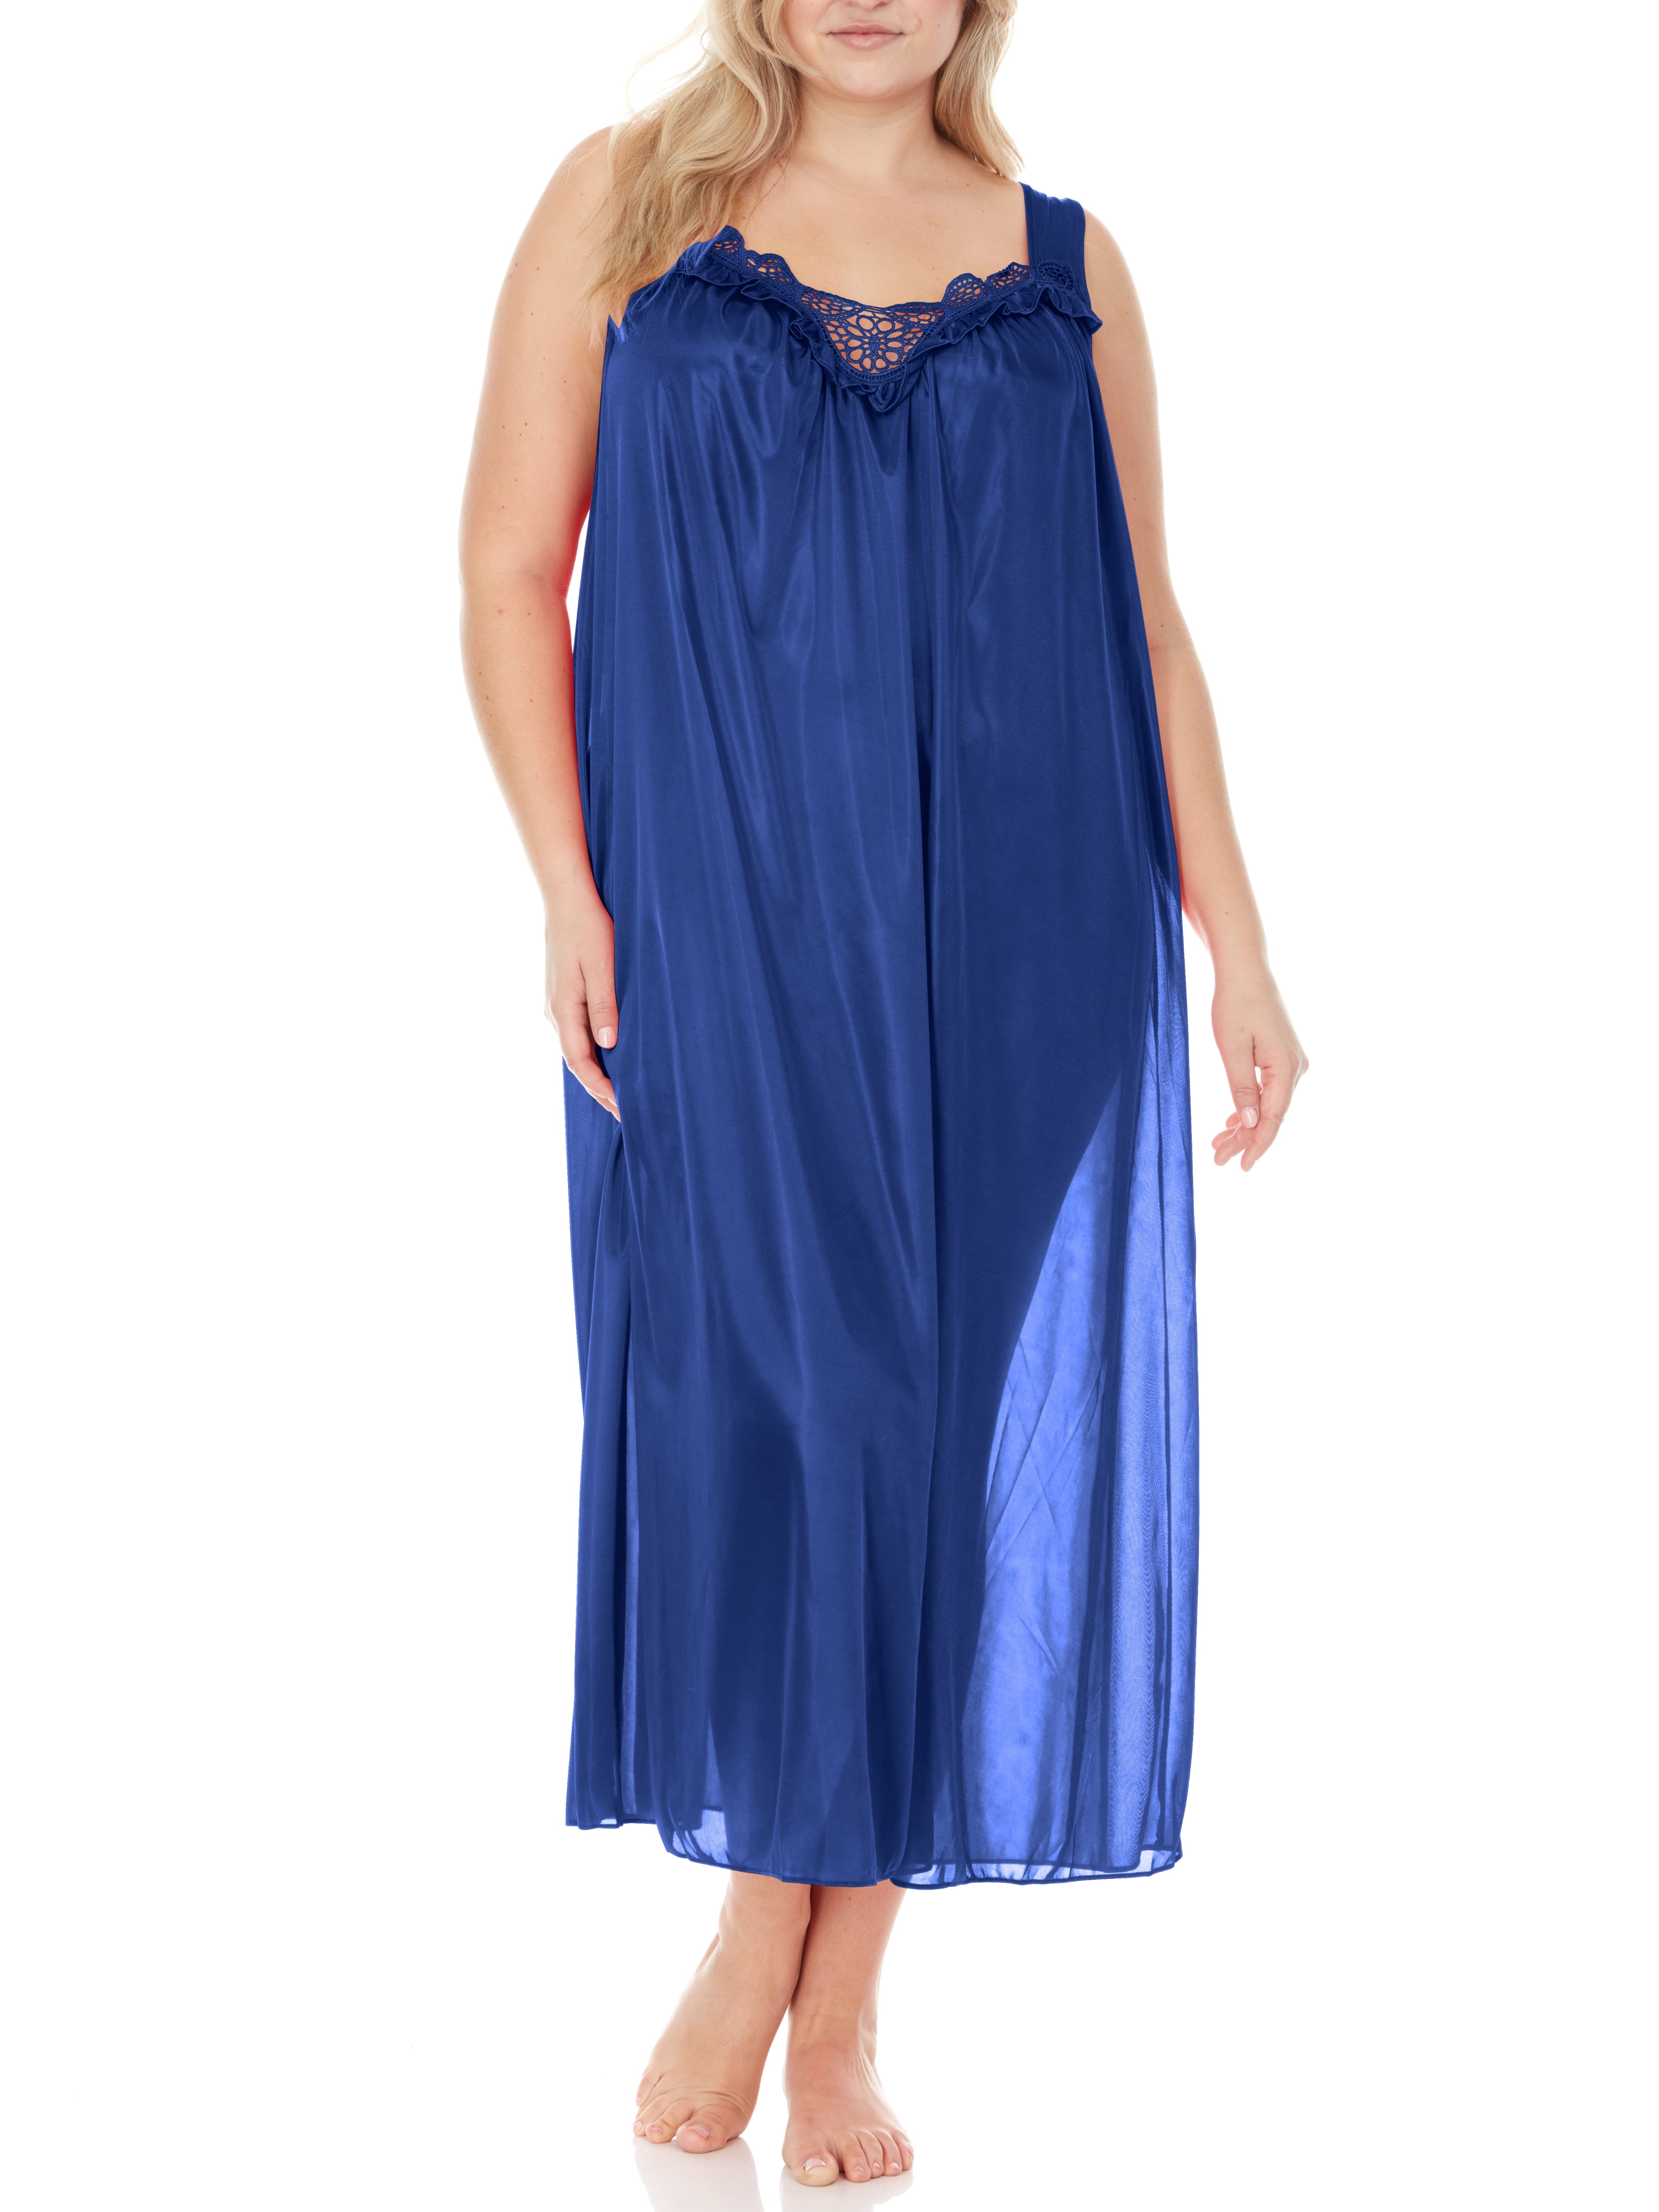 EZI Nightgowns for Women - Soft & Breathable Satin Night Gowns for Adult Women - Medium to Size Womens Sleep Shirts - Long Mid-Length Nightgown - Walmart.com